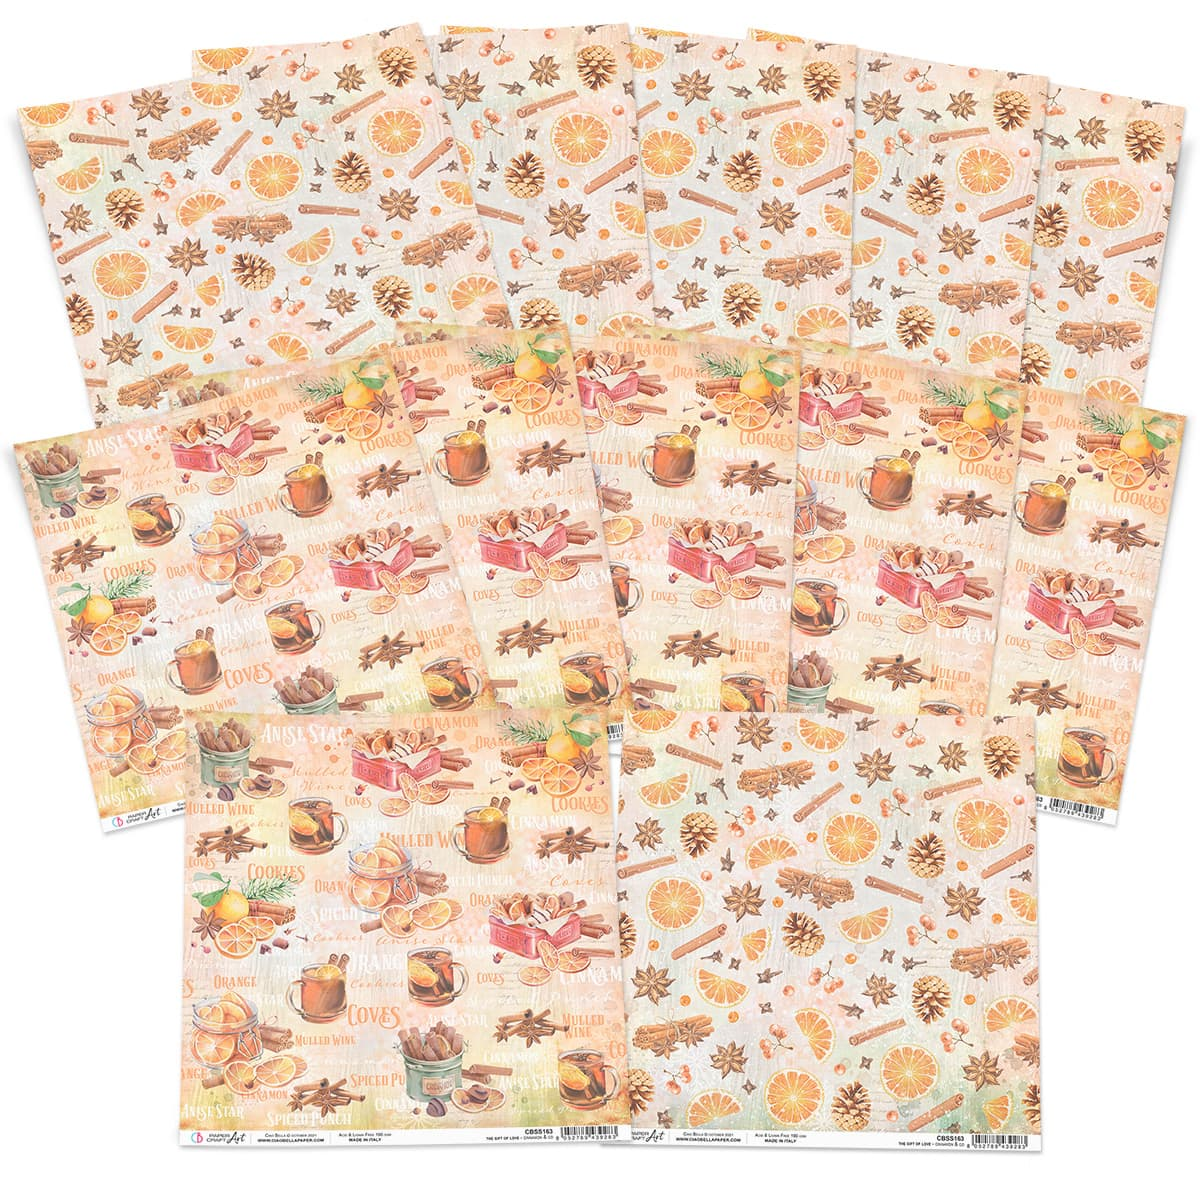 Ciao Bella 1 Piece CINNAMON & CO Scrapbook Paper Scrapbooking Paper 12 X 12  Inches Mixed Media Made in Italy CBSS163 -  Hong Kong